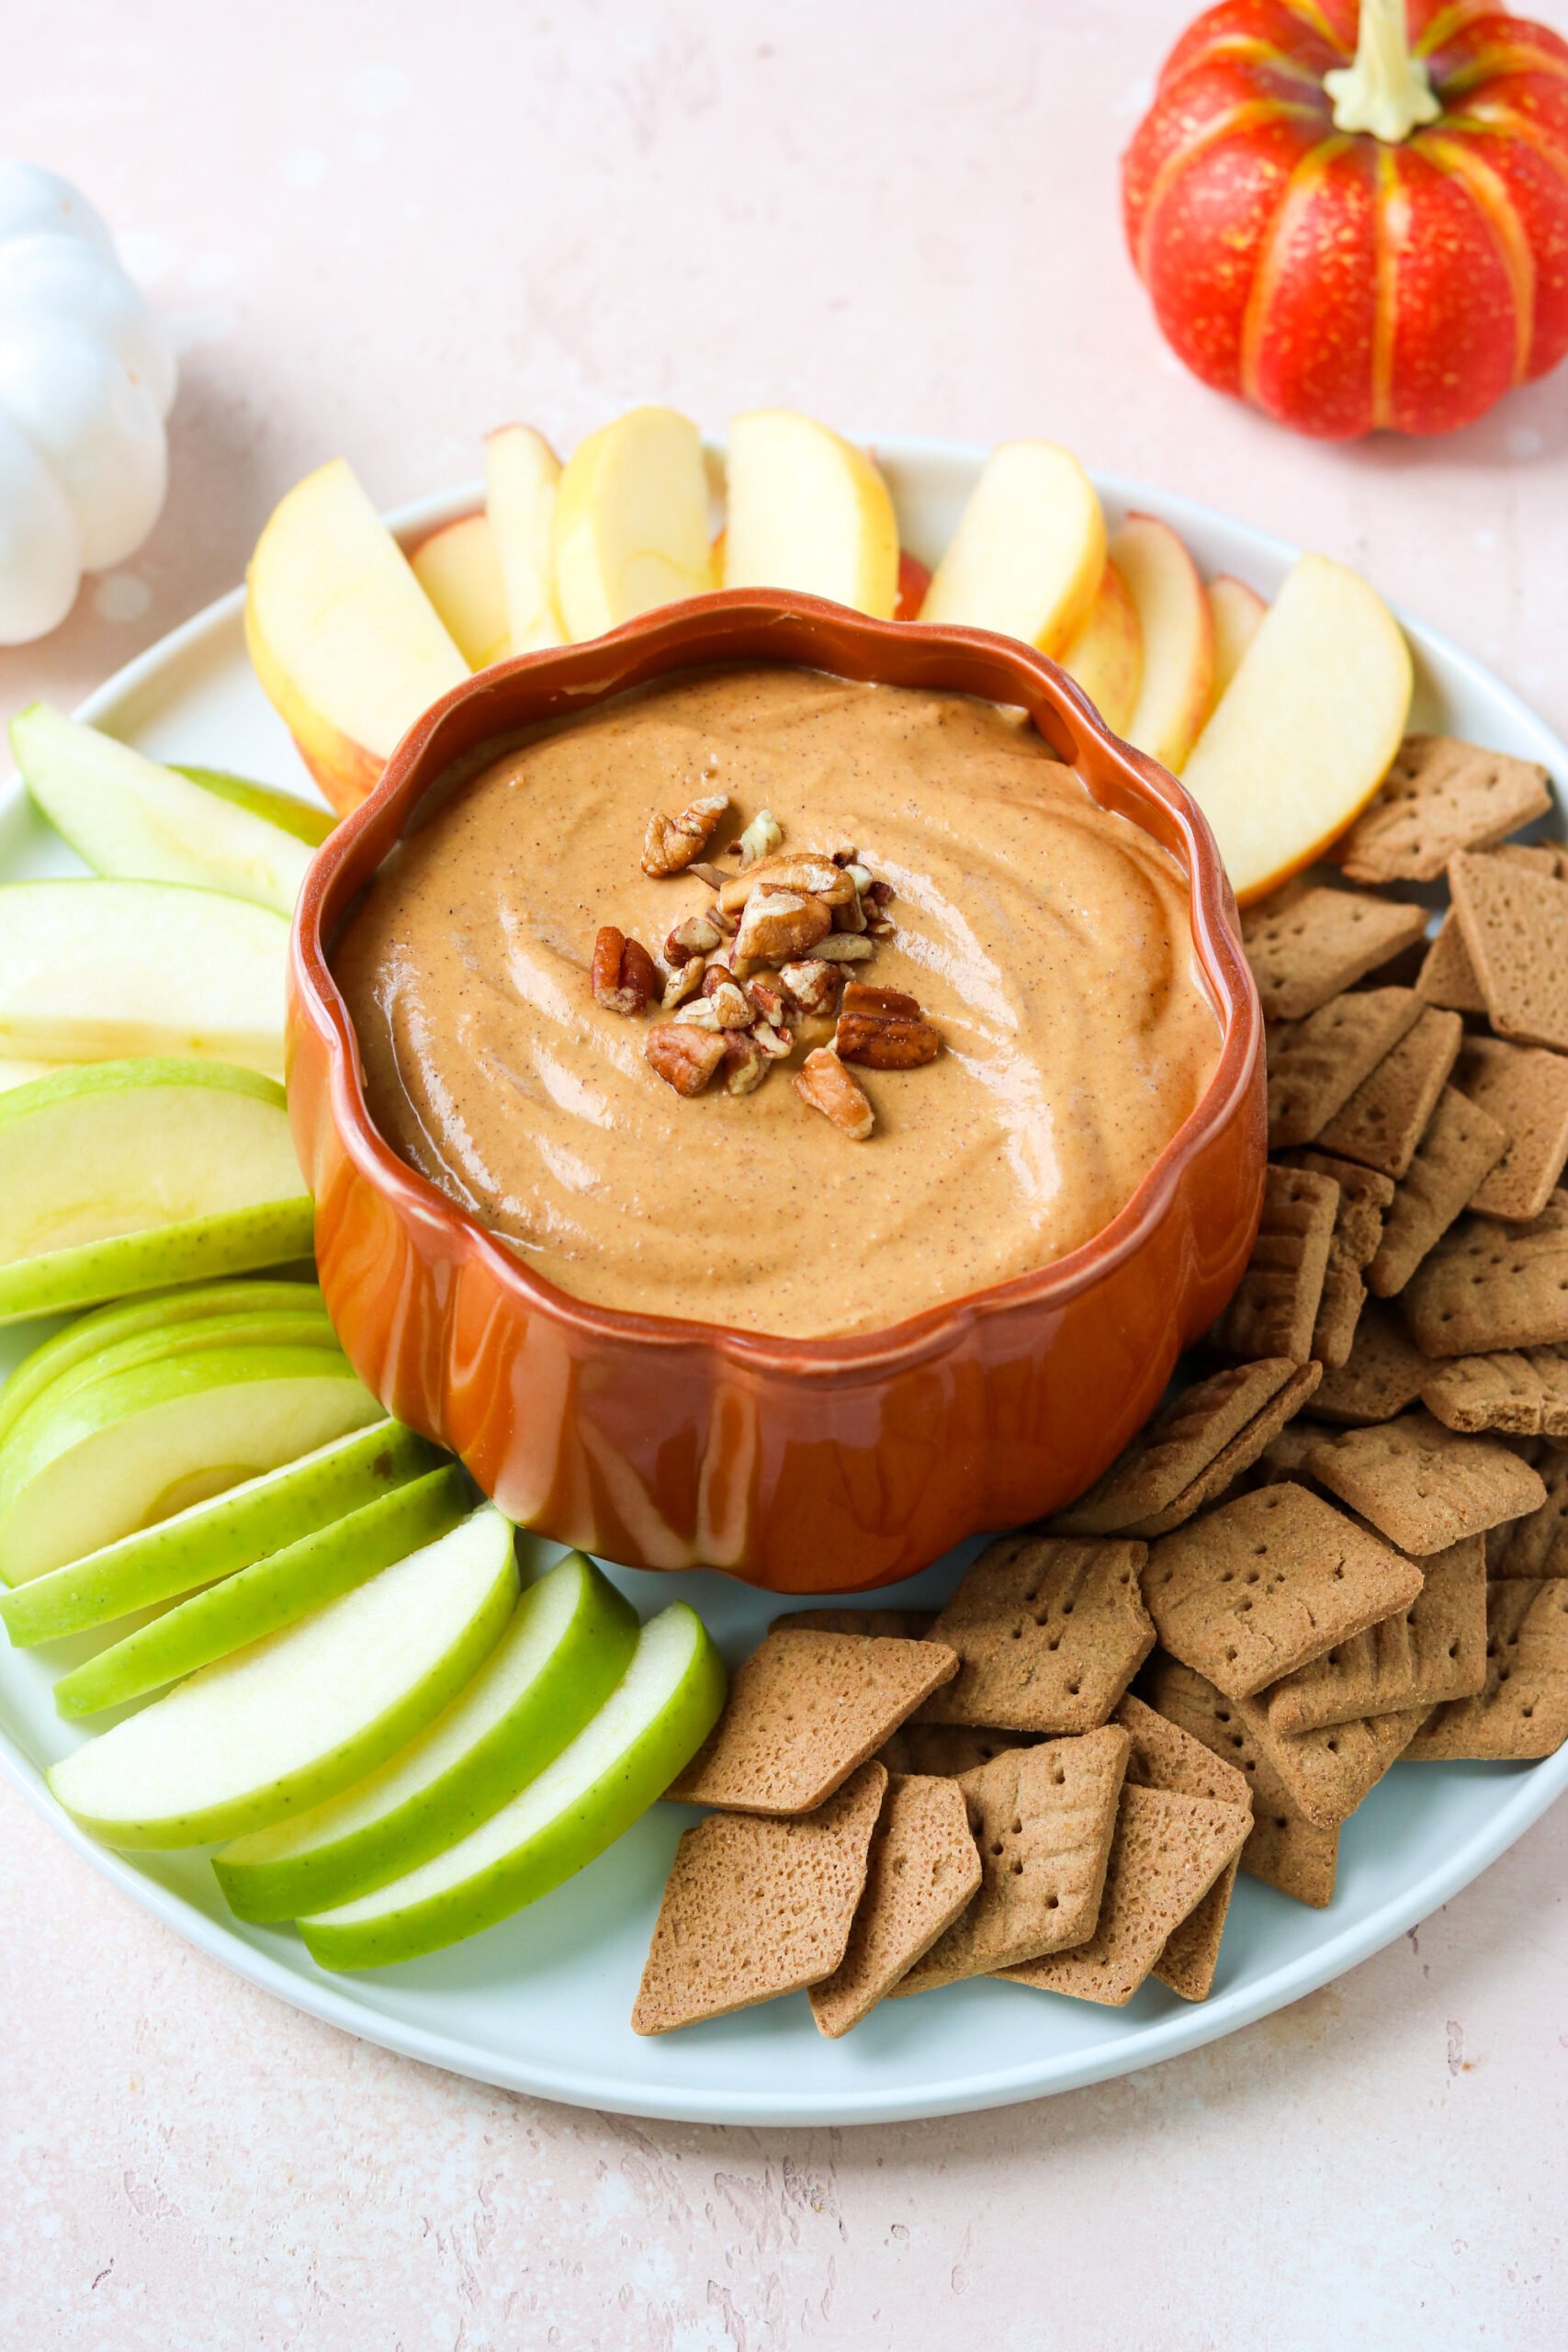 pumpkin cream cheese dip in a pumpkin-shaped bowl on a plate with apples and sweet thins